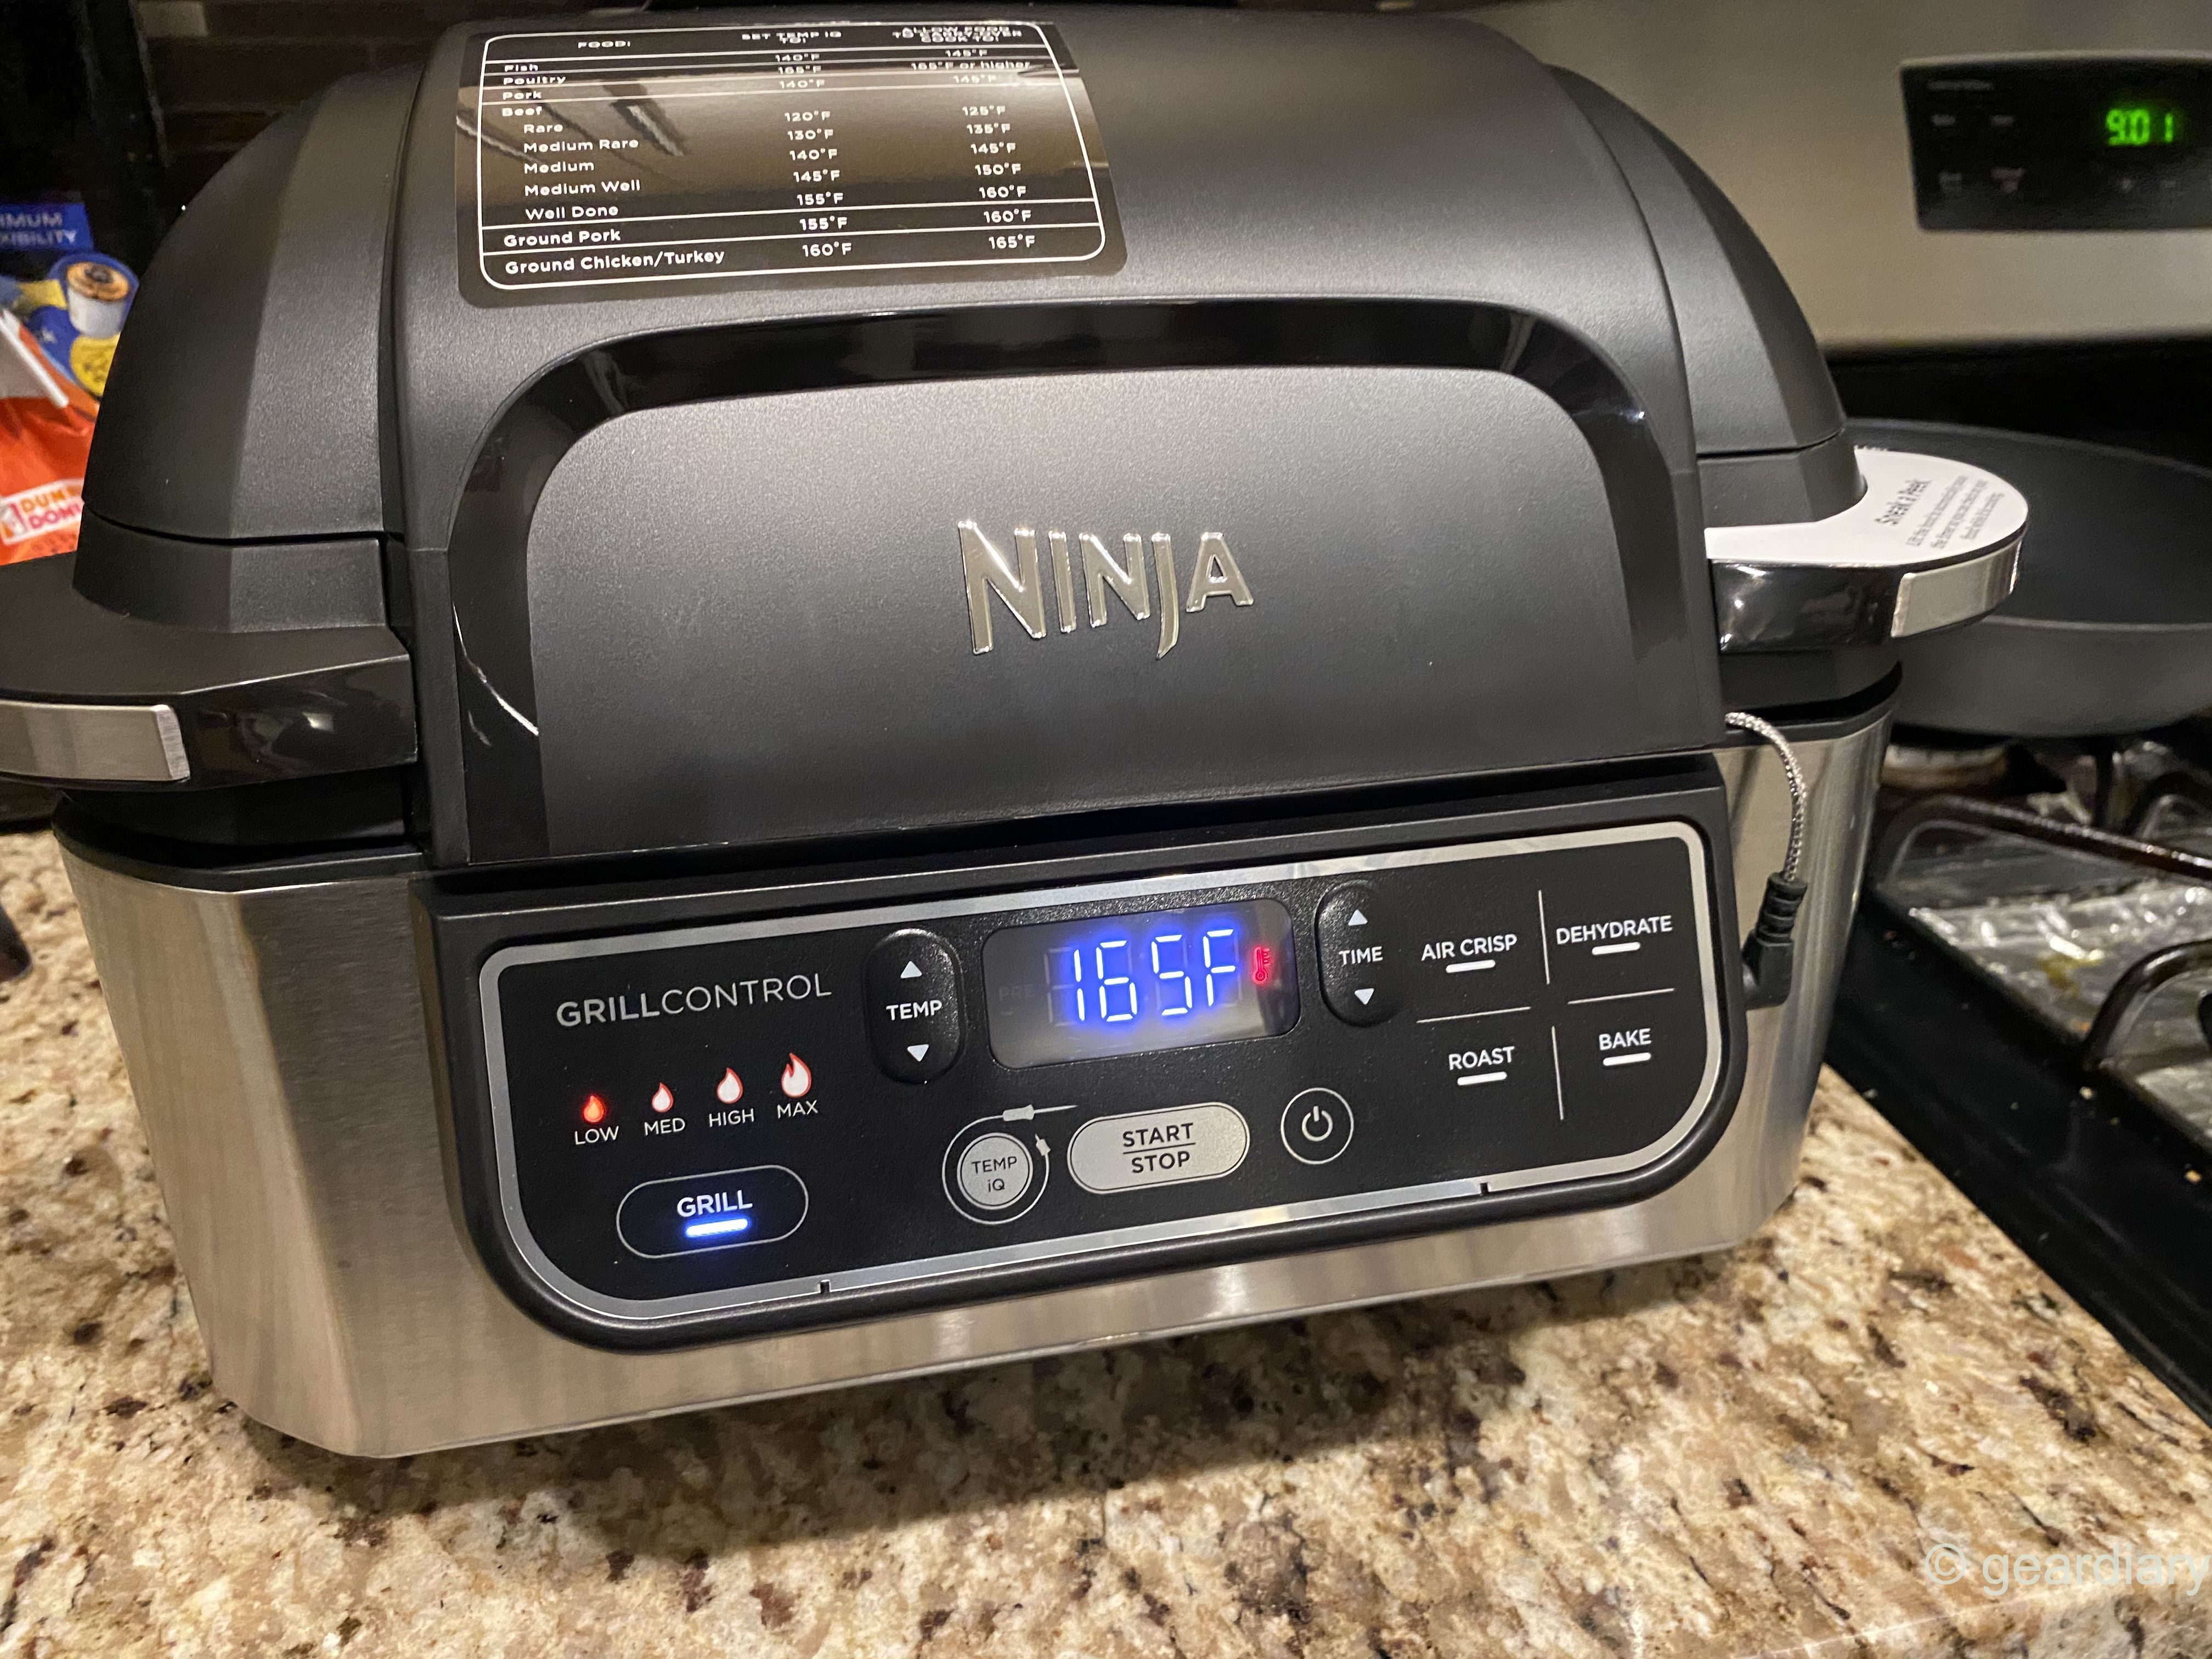 Grilling Indoors with the Ninja Foodi Grill Is Perfect for ...